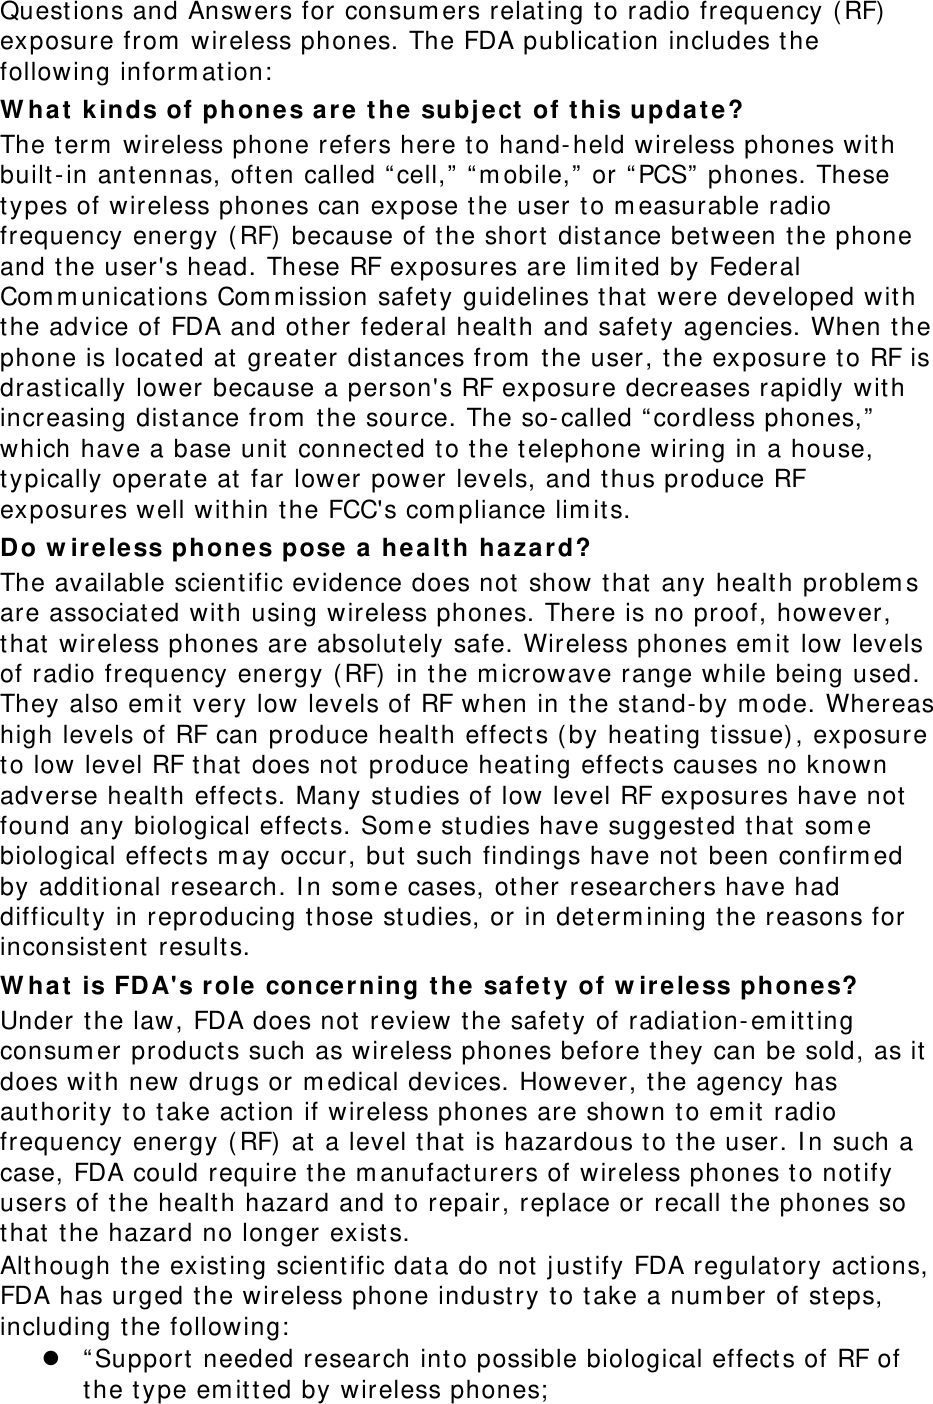 Questions and Answers for consumers relating to radio frequency (RF) exposure from wireless phones. The FDA publication includes the following information: What kinds of phones are the subject of this update? The term wireless phone refers here to hand-held wireless phones with built-in antennas, often called “cell,” “mobile,” or “PCS” phones. These types of wireless phones can expose the user to measurable radio frequency energy (RF) because of the short distance between the phone and the user&apos;s head. These RF exposures are limited by Federal Communications Commission safety guidelines that were developed with the advice of FDA and other federal health and safety agencies. When the phone is located at greater distances from the user, the exposure to RF is drastically lower because a person&apos;s RF exposure decreases rapidly with increasing distance from the source. The so-called “cordless phones,” which have a base unit connected to the telephone wiring in a house, typically operate at far lower power levels, and thus produce RF exposures well within the FCC&apos;s compliance limits. Do wireless phones pose a health hazard? The available scientific evidence does not show that any health problems are associated with using wireless phones. There is no proof, however, that wireless phones are absolutely safe. Wireless phones emit low levels of radio frequency energy (RF) in the microwave range while being used. They also emit very low levels of RF when in the stand-by mode. Whereas high levels of RF can produce health effects (by heating tissue), exposure to low level RF that does not produce heating effects causes no known adverse health effects. Many studies of low level RF exposures have not found any biological effects. Some studies have suggested that some biological effects may occur, but such findings have not been confirmed by additional research. In some cases, other researchers have had difficulty in reproducing those studies, or in determining the reasons for inconsistent results. What is FDA&apos;s role concerning the safety of wireless phones? Under the law, FDA does not review the safety of radiation-emitting consumer products such as wireless phones before they can be sold, as it does with new drugs or medical devices. However, the agency has authority to take action if wireless phones are shown to emit radio frequency energy (RF) at a level that is hazardous to the user. In such a case, FDA could require the manufacturers of wireless phones to notify users of the health hazard and to repair, replace or recall the phones so that the hazard no longer exists. Although the existing scientific data do not justify FDA regulatory actions, FDA has urged the wireless phone industry to take a number of steps, including the following:  “Support needed research into possible biological effects of RF of the type emitted by wireless phones; 